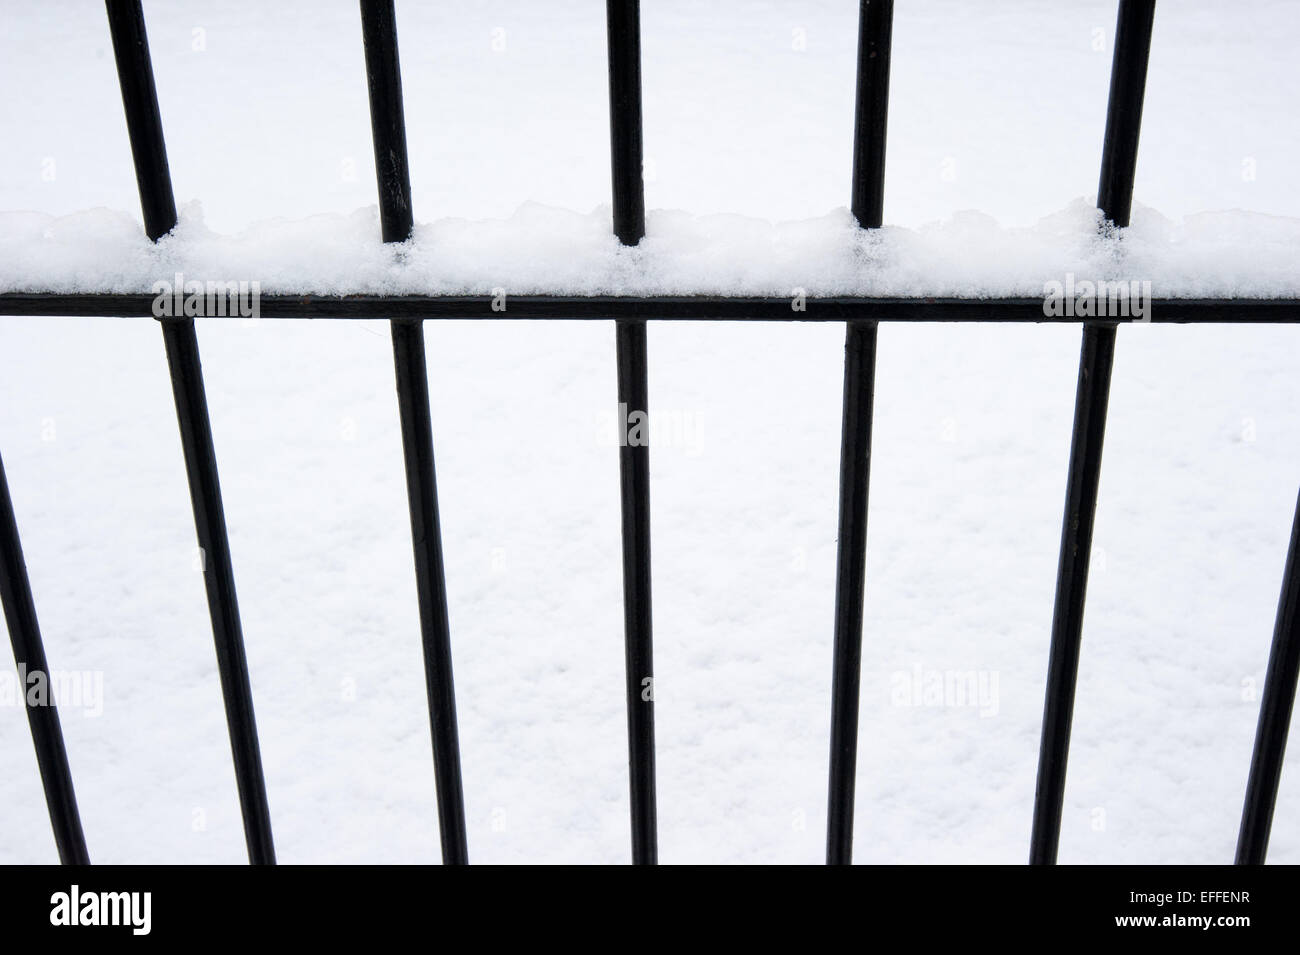 Oxford, UK. 3rd February 2015. Railings provide a strong abstract image. A couple of inches of snow covers the ground and classic landscapes of Oxford for the first time this winter. Photo: Andrew Walmsley/Alamy Live News Stock Photo